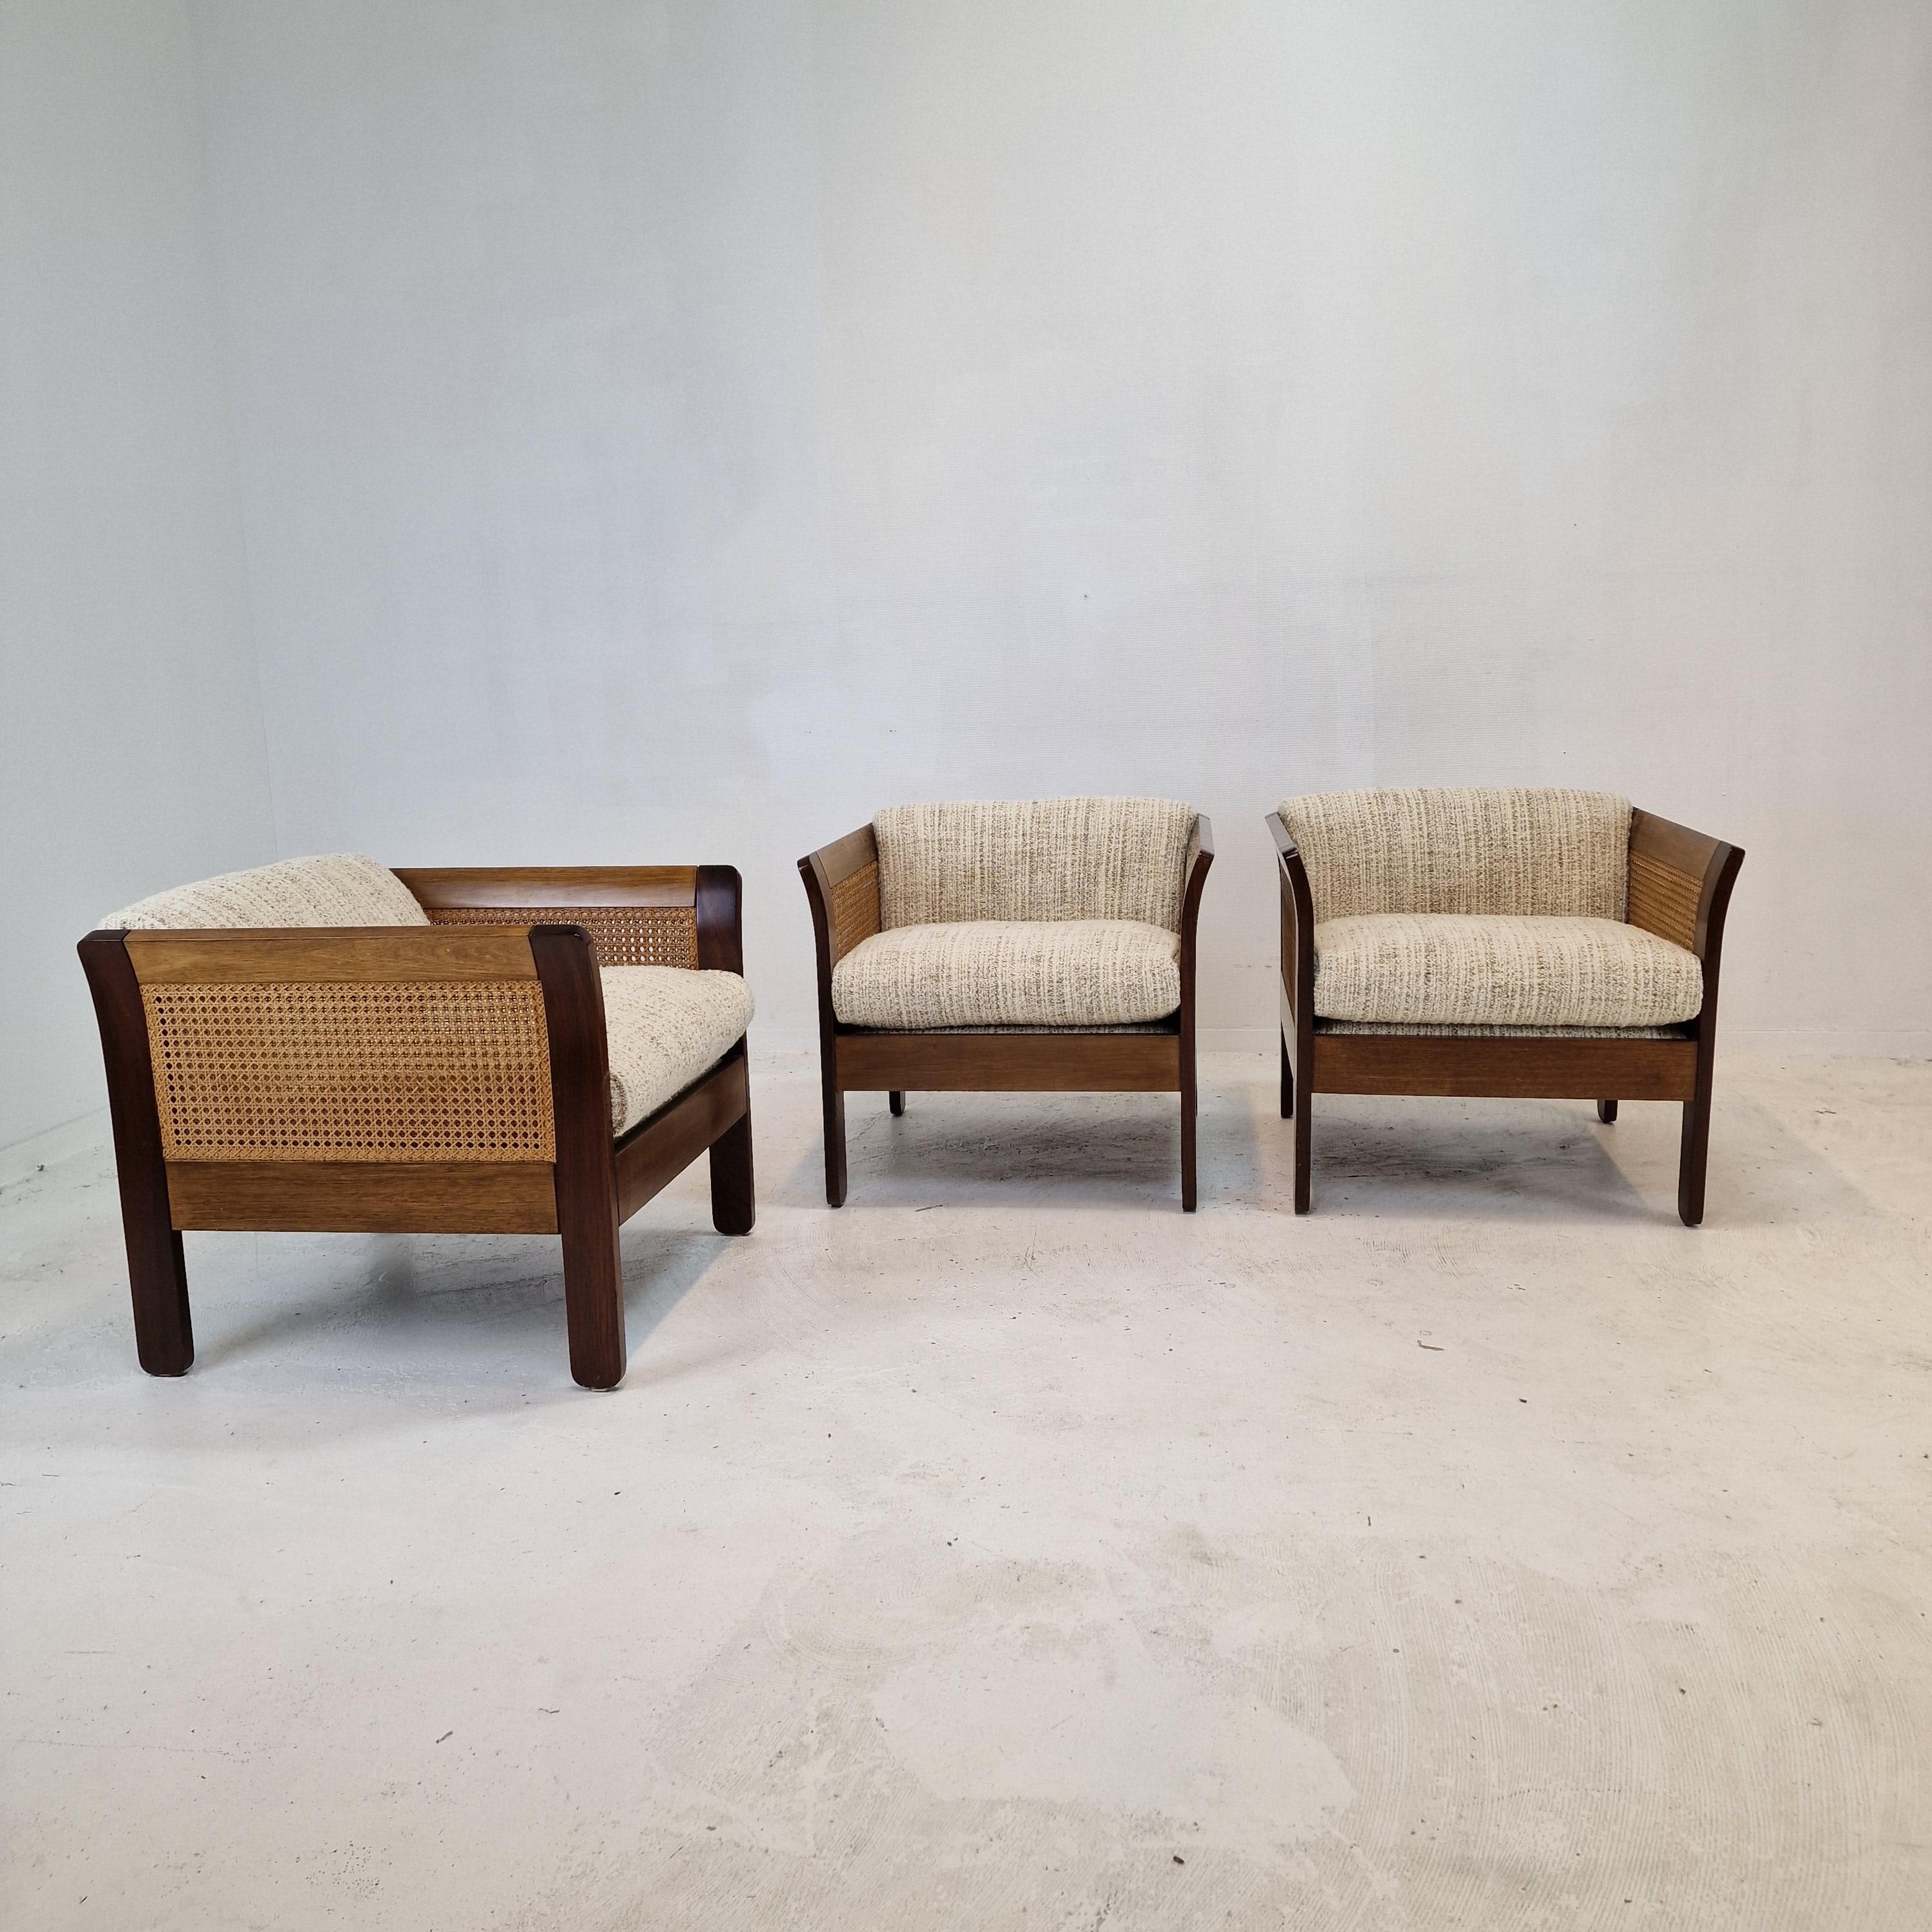 Lovely set of 3 Club or Lounge Chairs, designed and fabricated in the 60's in Italy.

The beautiful structure of these comfortable chairs is made of solid wood and rattan. it is a stunning combination.

The chairs are just restored with new